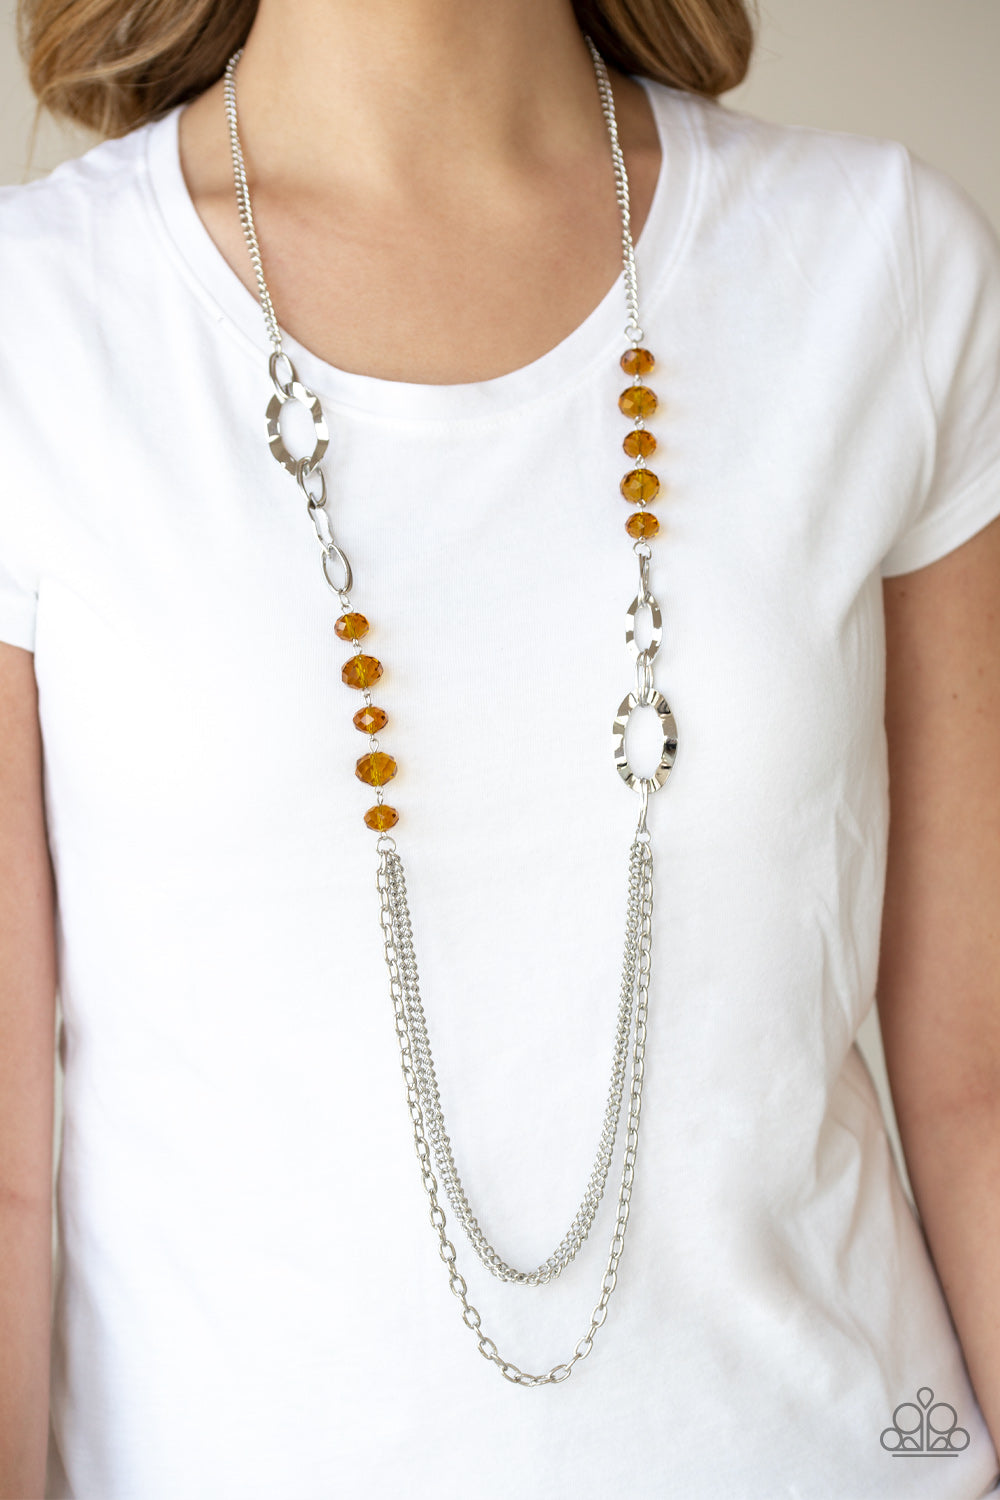 Modern Girl Glam Necklace (Brown, Gold)